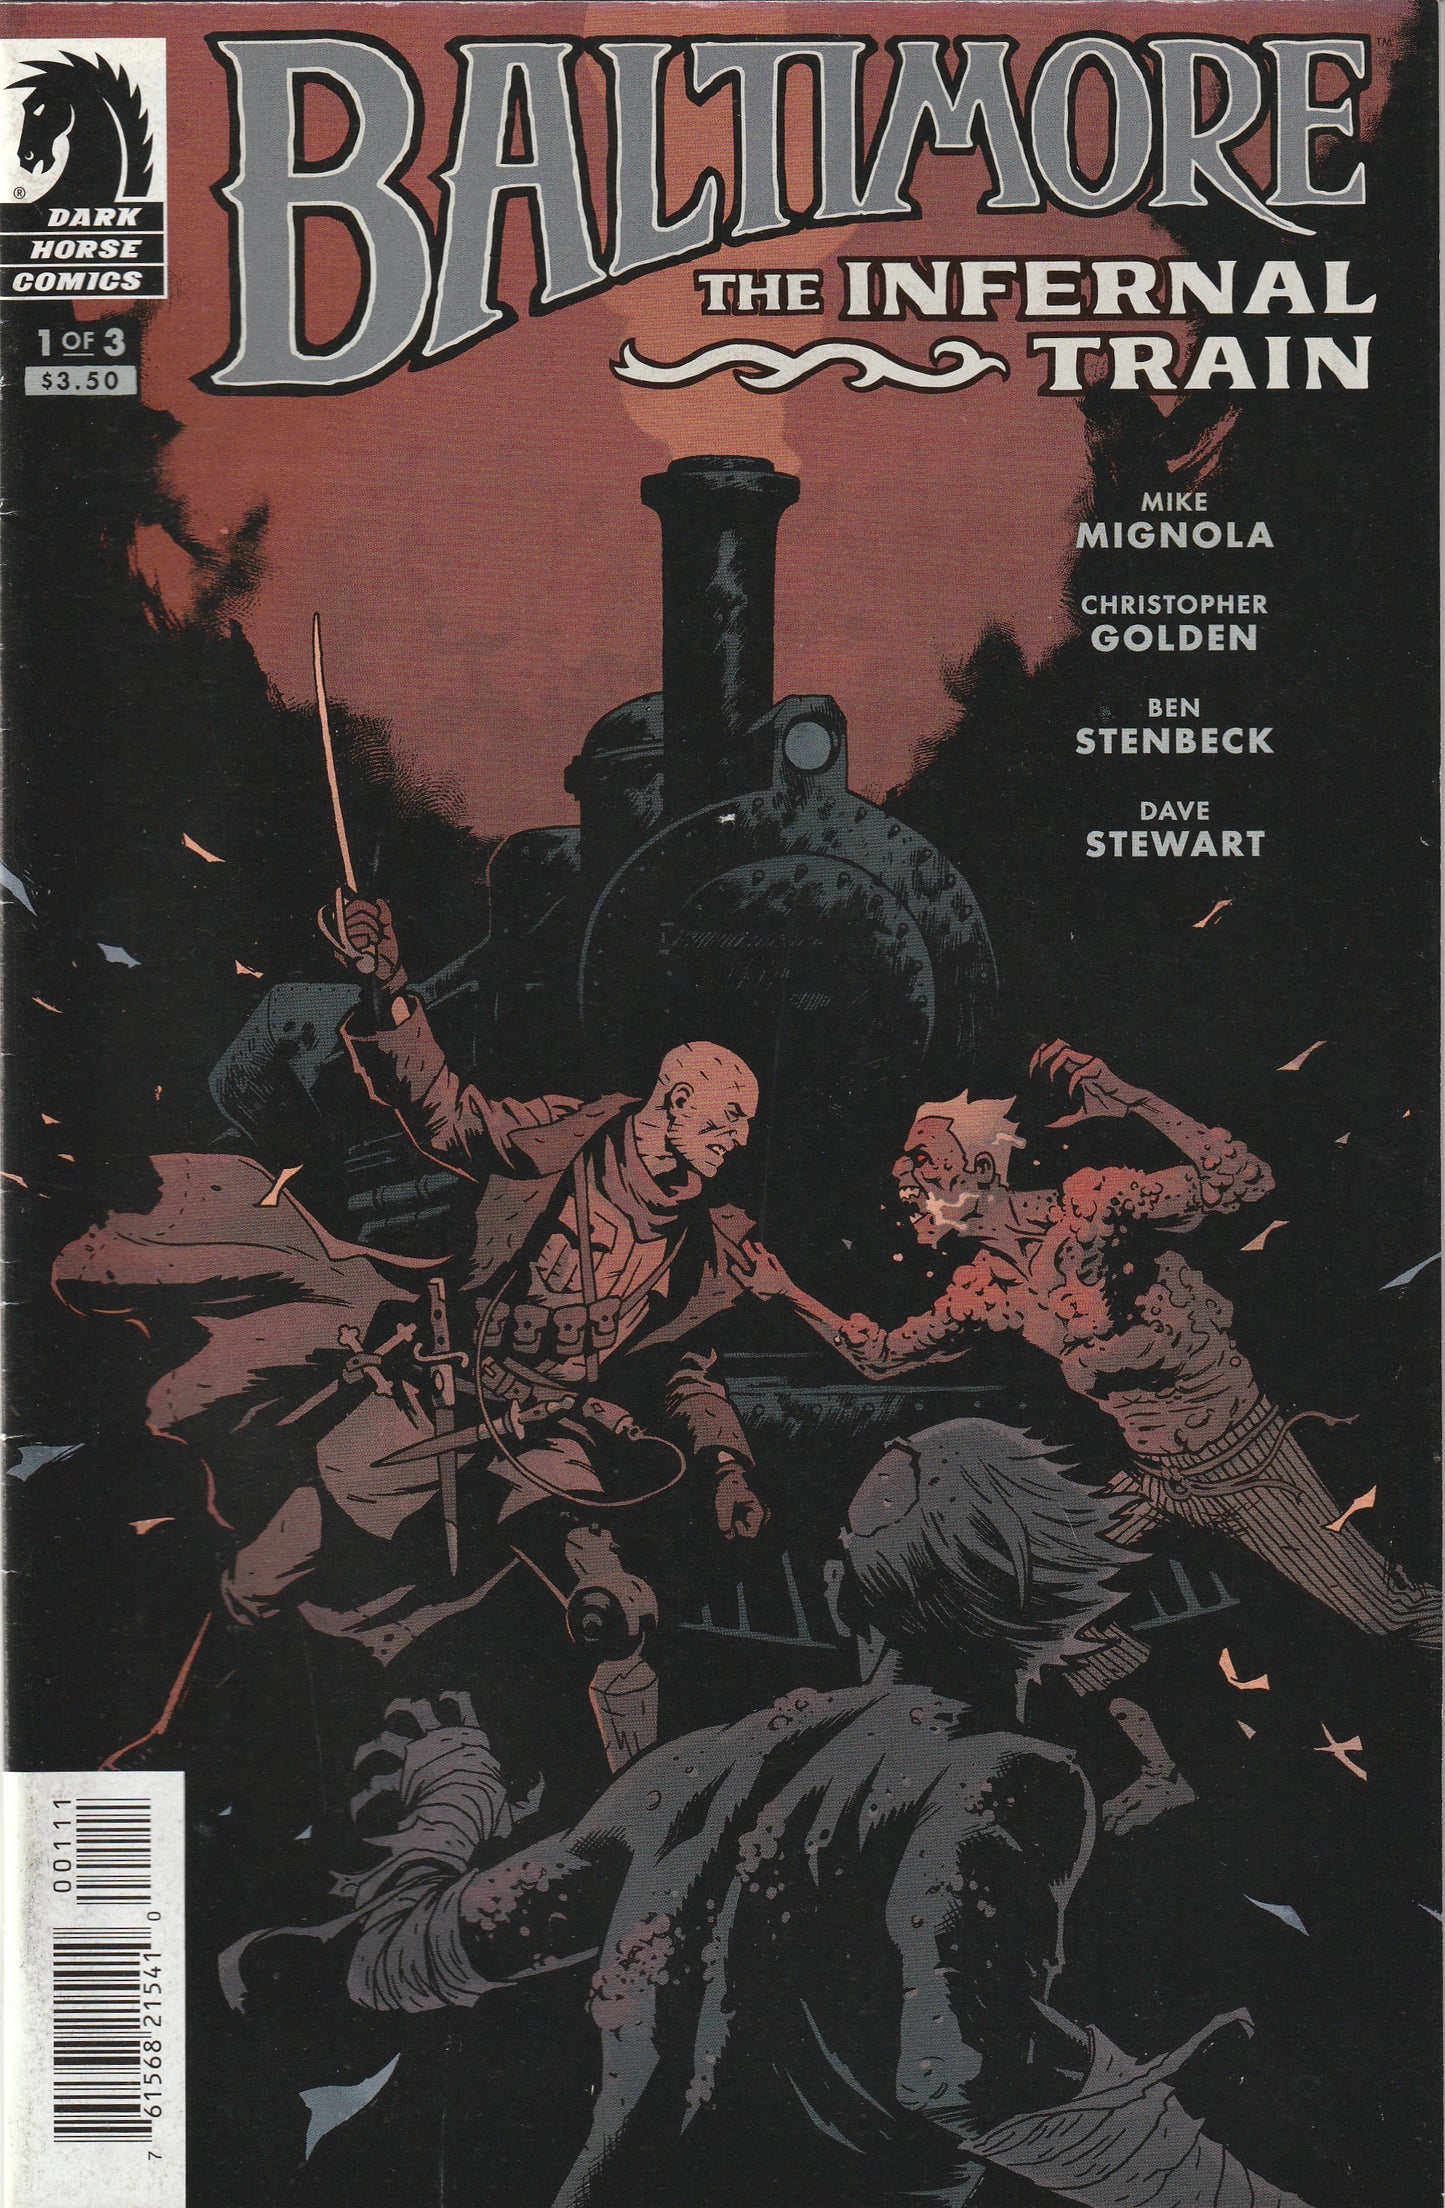 Baltimore: The Infernal Train #1 (of 3) (2013) - Mike Mignola